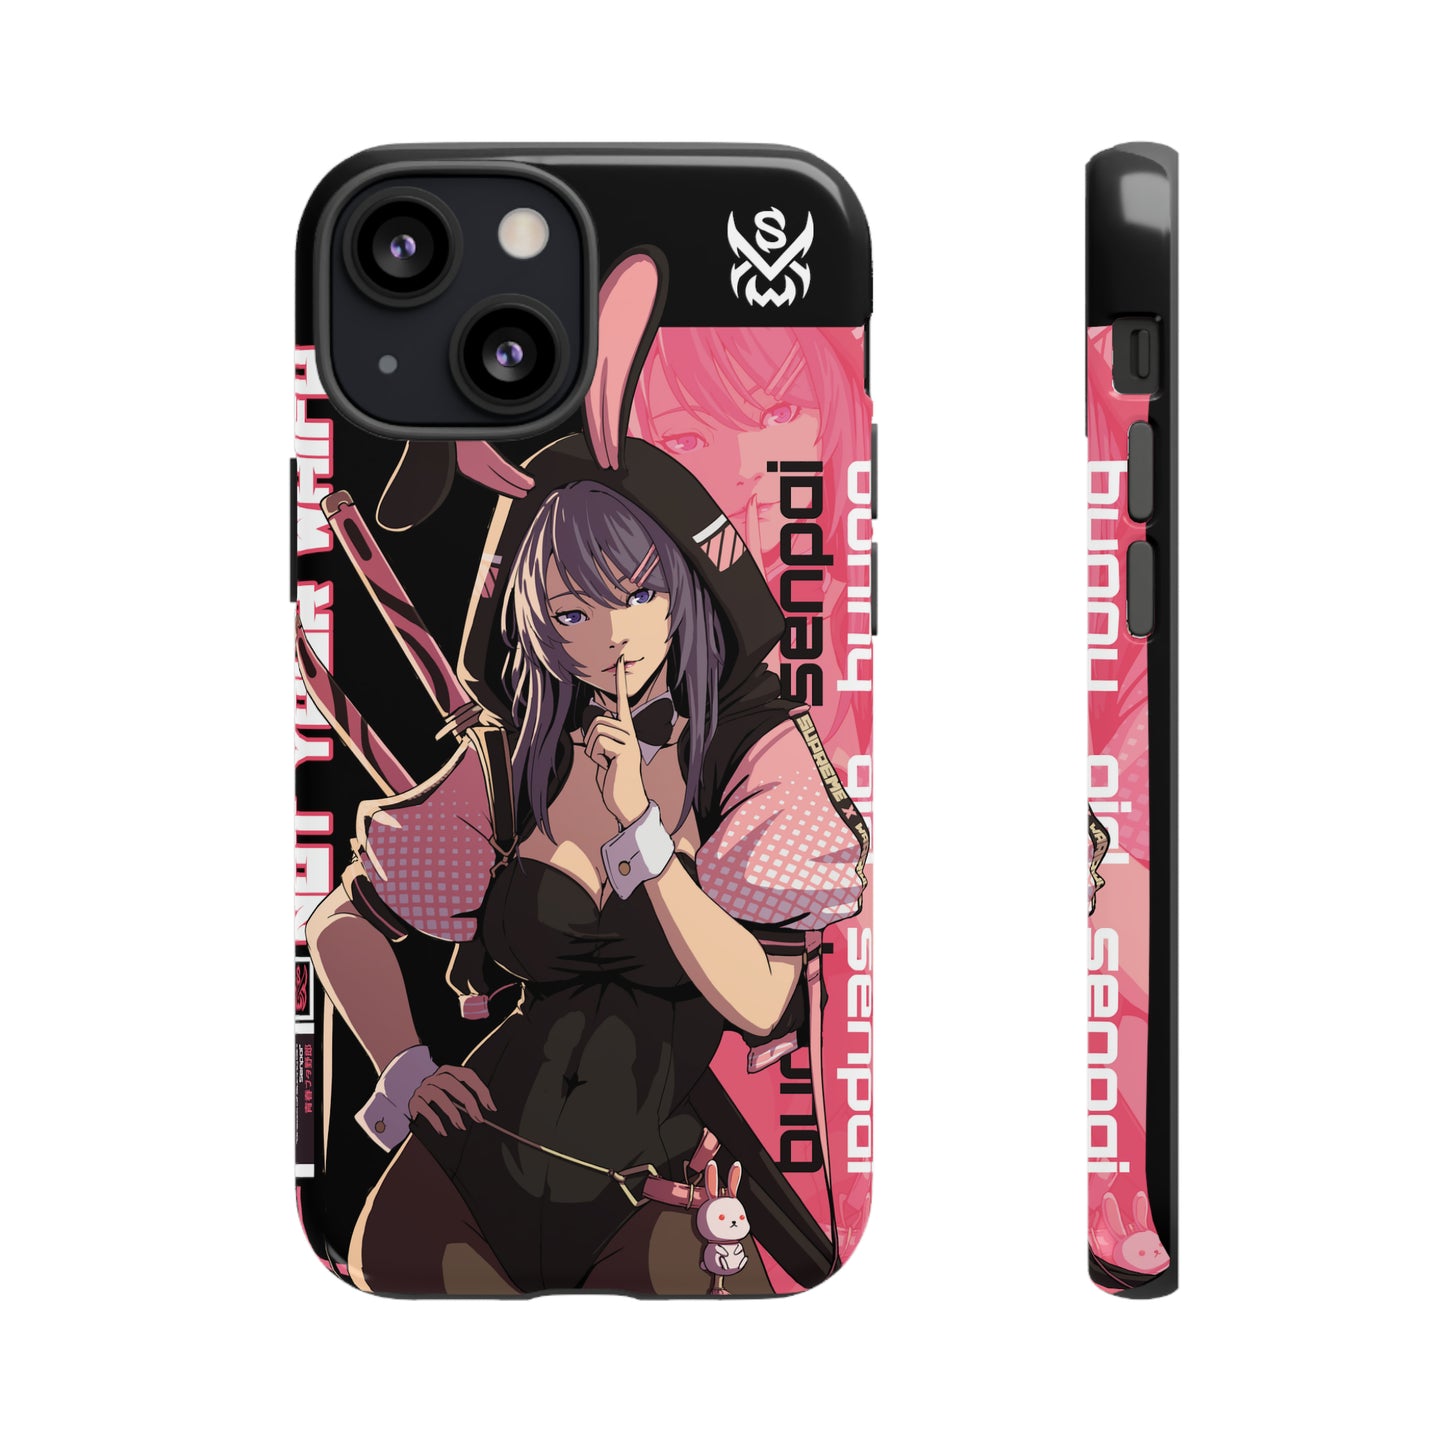 Bunny Girl / iPhone Case - LIMITED